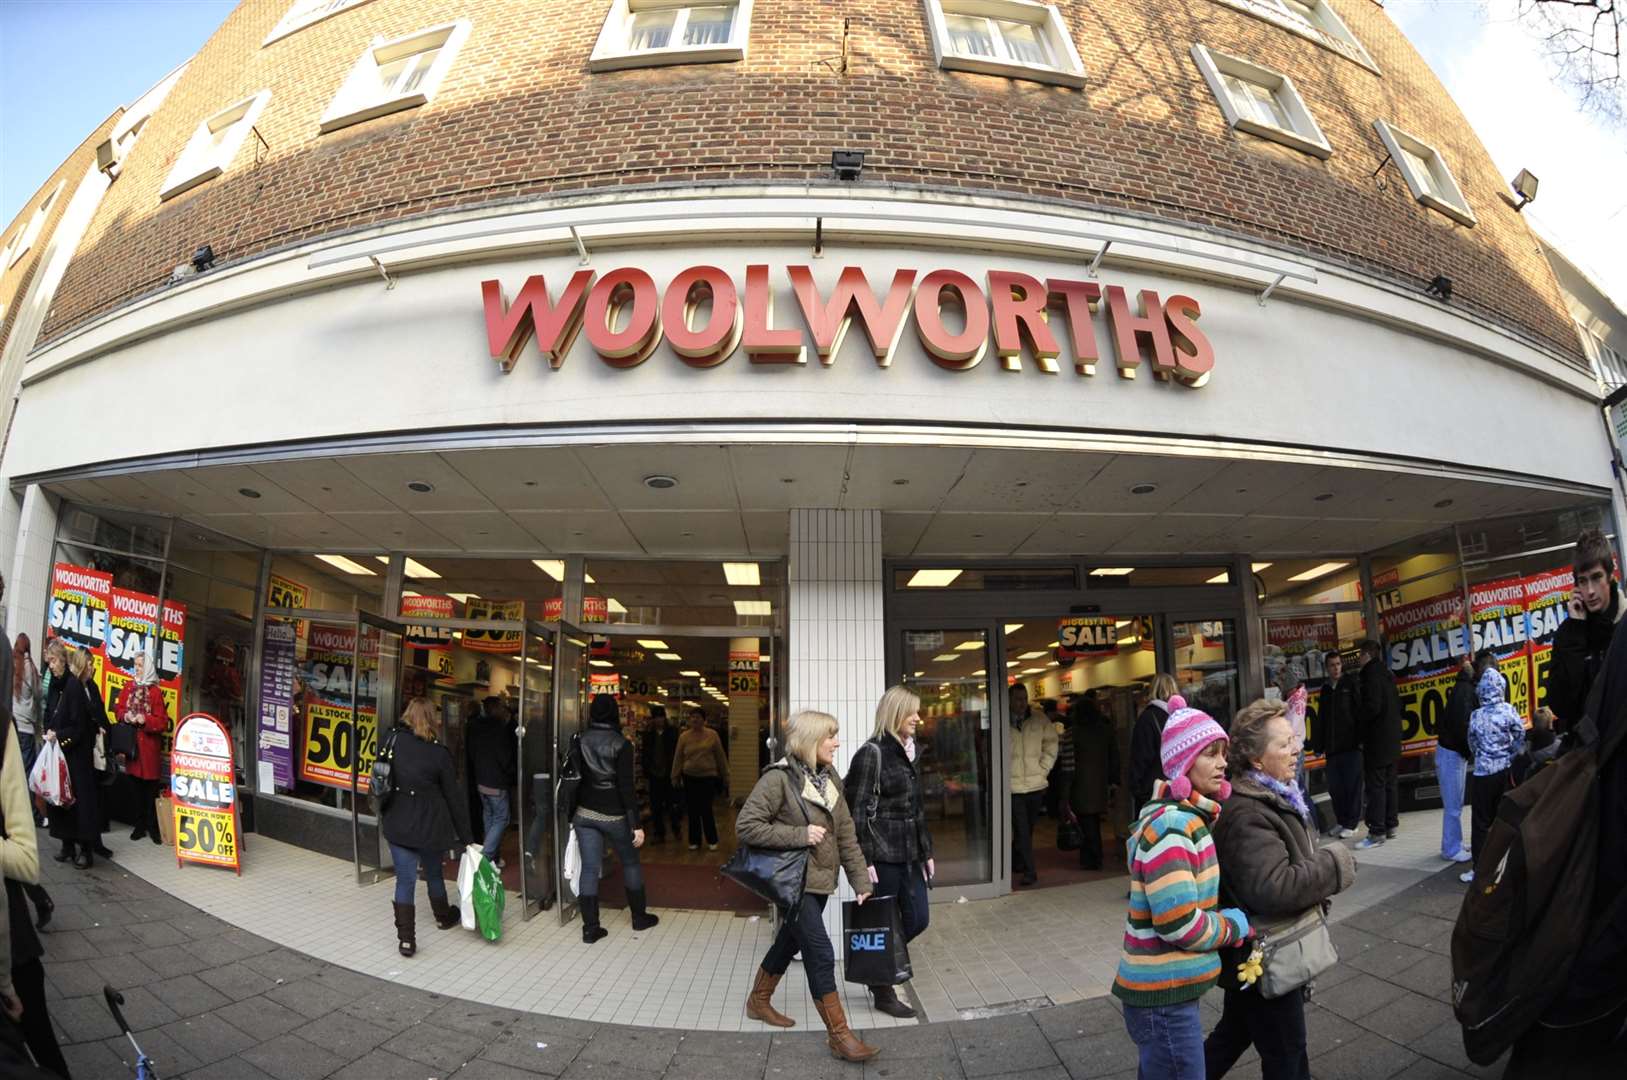 Woolworths in Canterbury just prior to its closure in 2008 - Theo Paphitis made a bid to buy much of the estate to keep the brand alive but administrators demanded too much money. Picture: Barry Goodwin